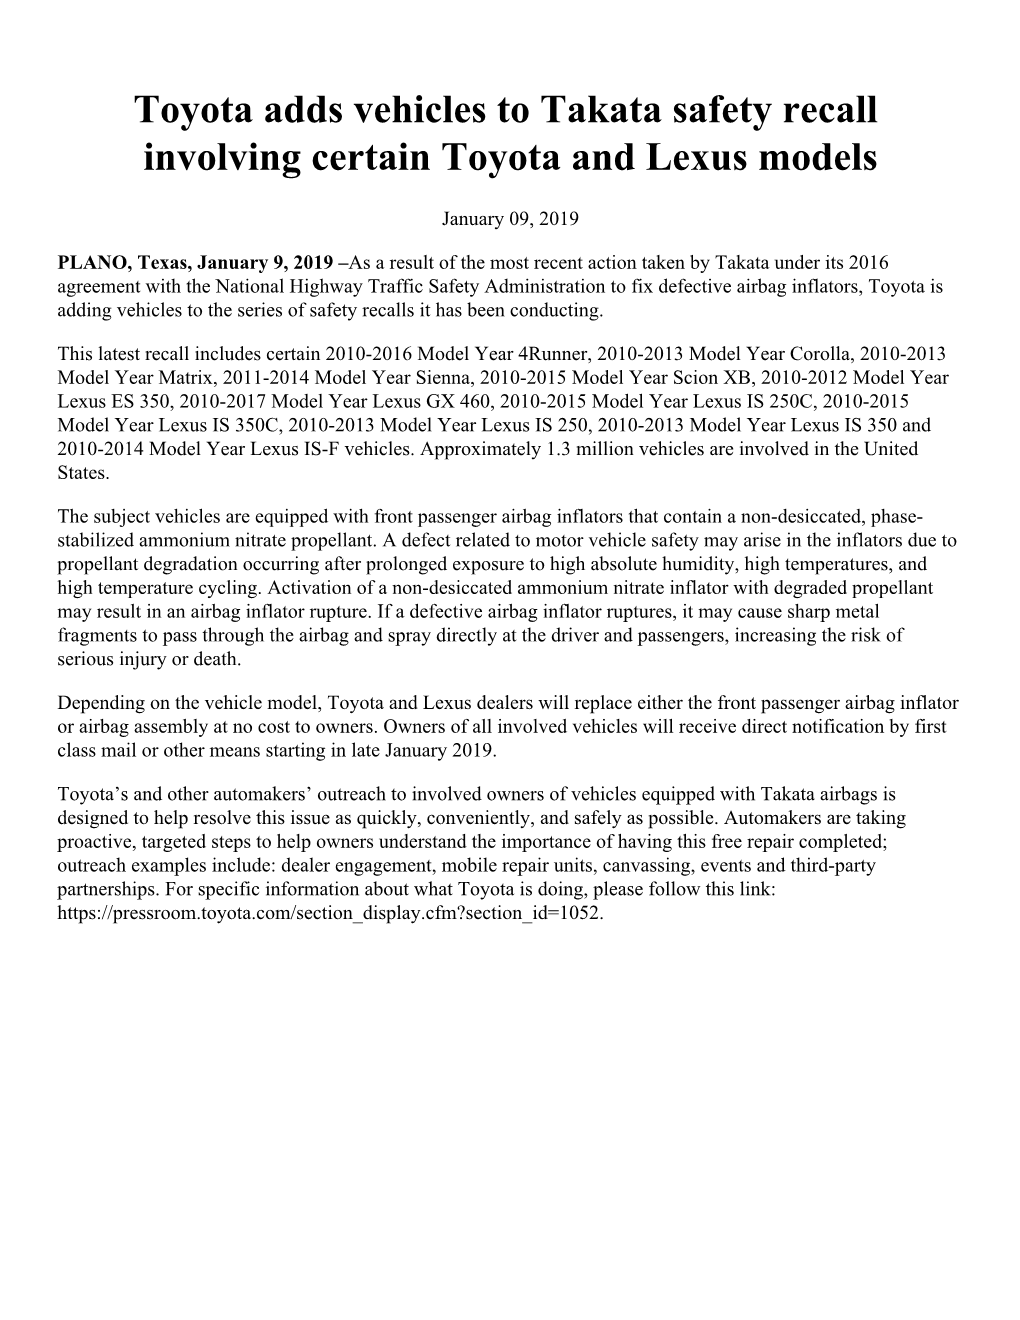 Toyota Adds Vehicles to Takata Safety Recall Involving Certain Toyota and Lexus Models